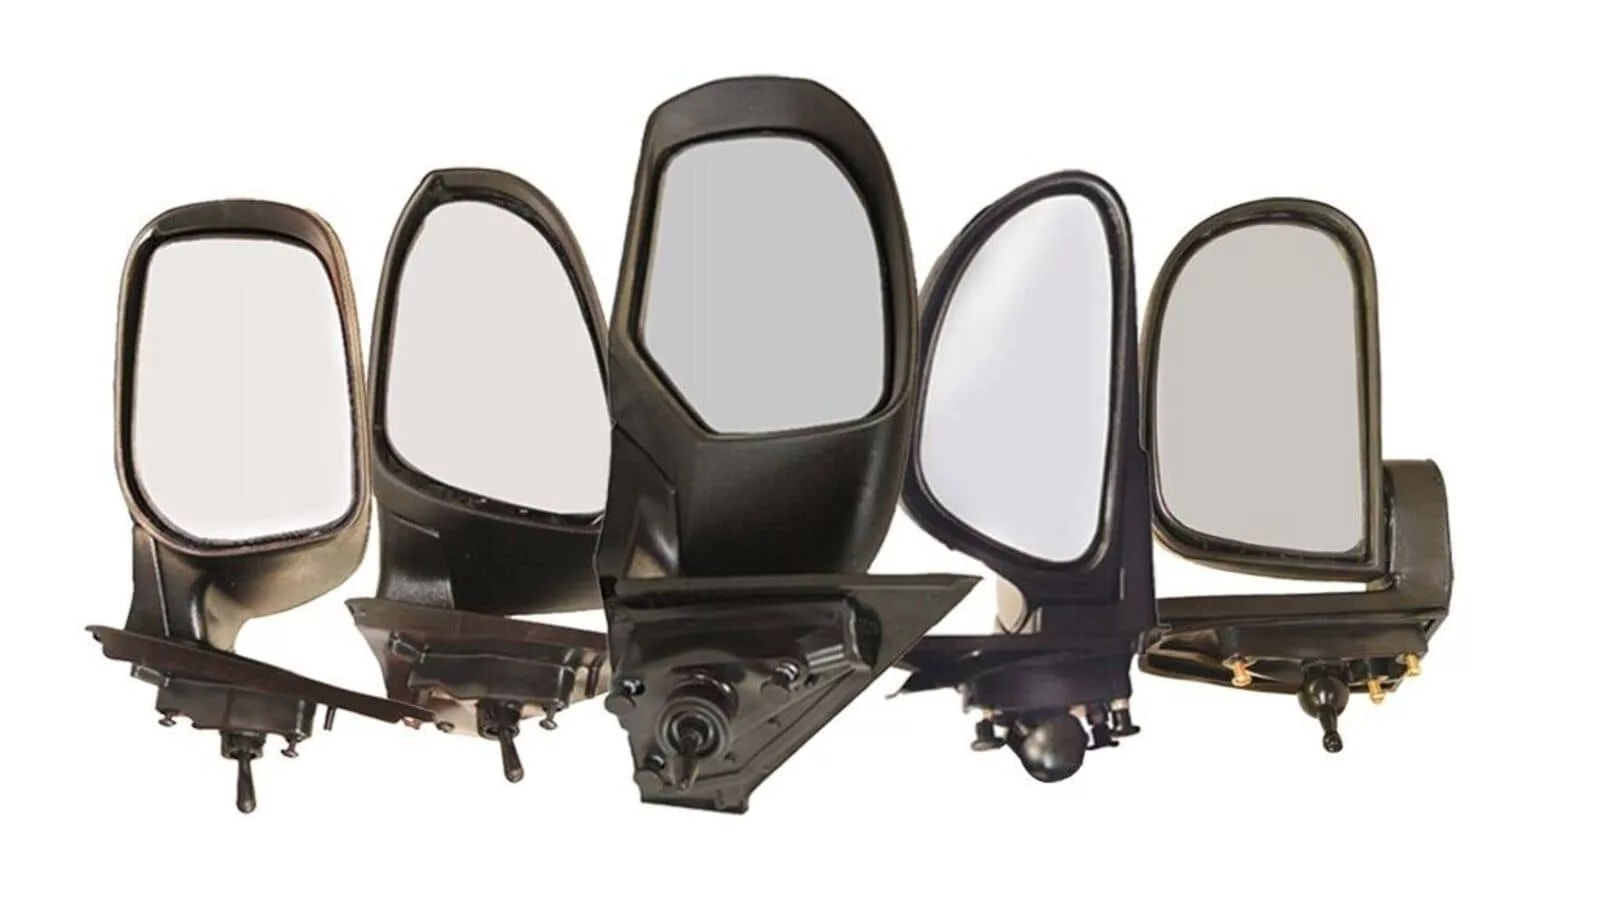 Uno Minda launches rearview mirror for passenger vehicles, available from ₹199